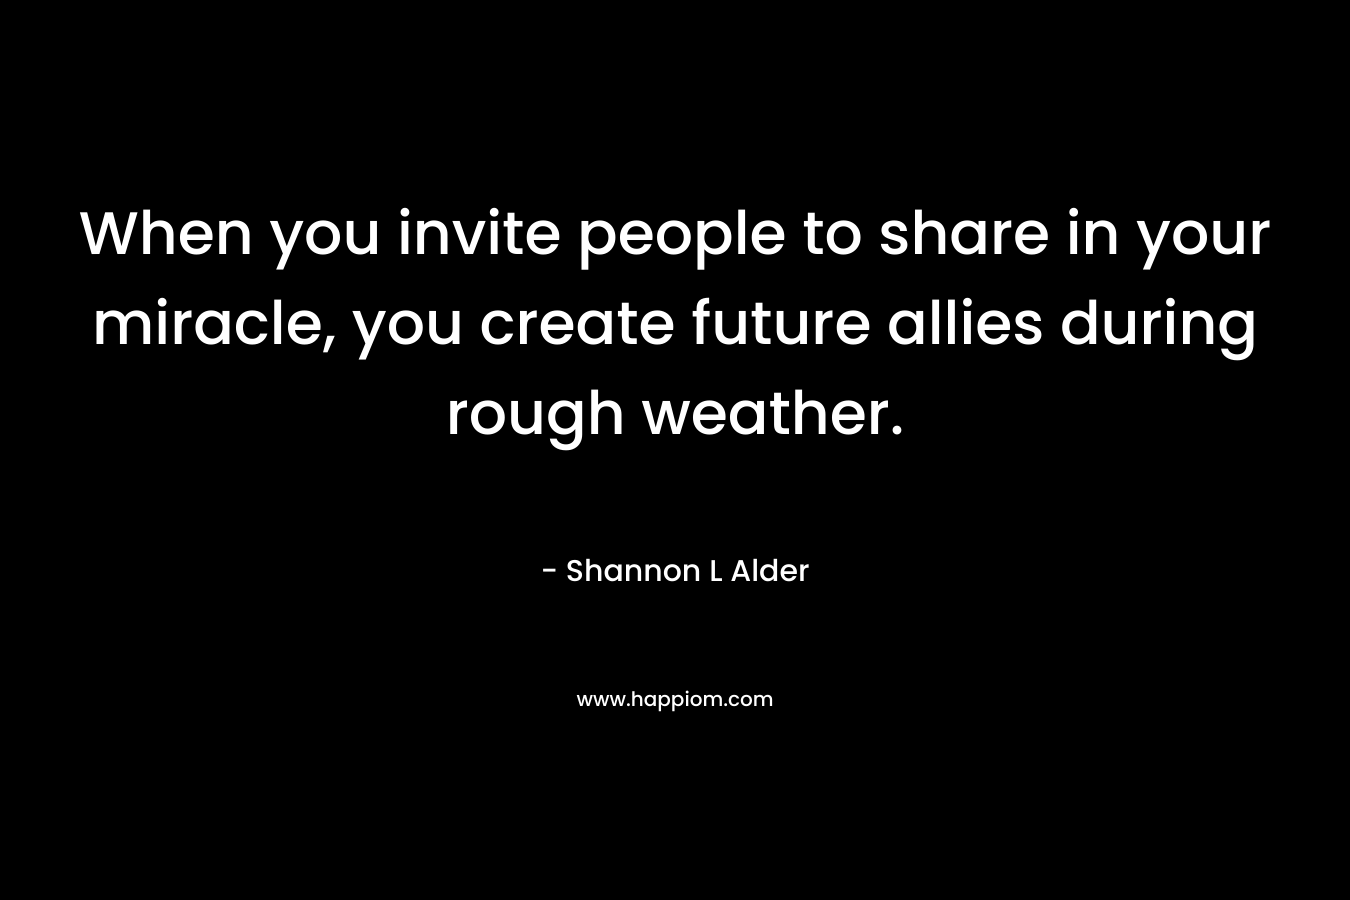 When you invite people to share in your miracle, you create future allies during rough weather.